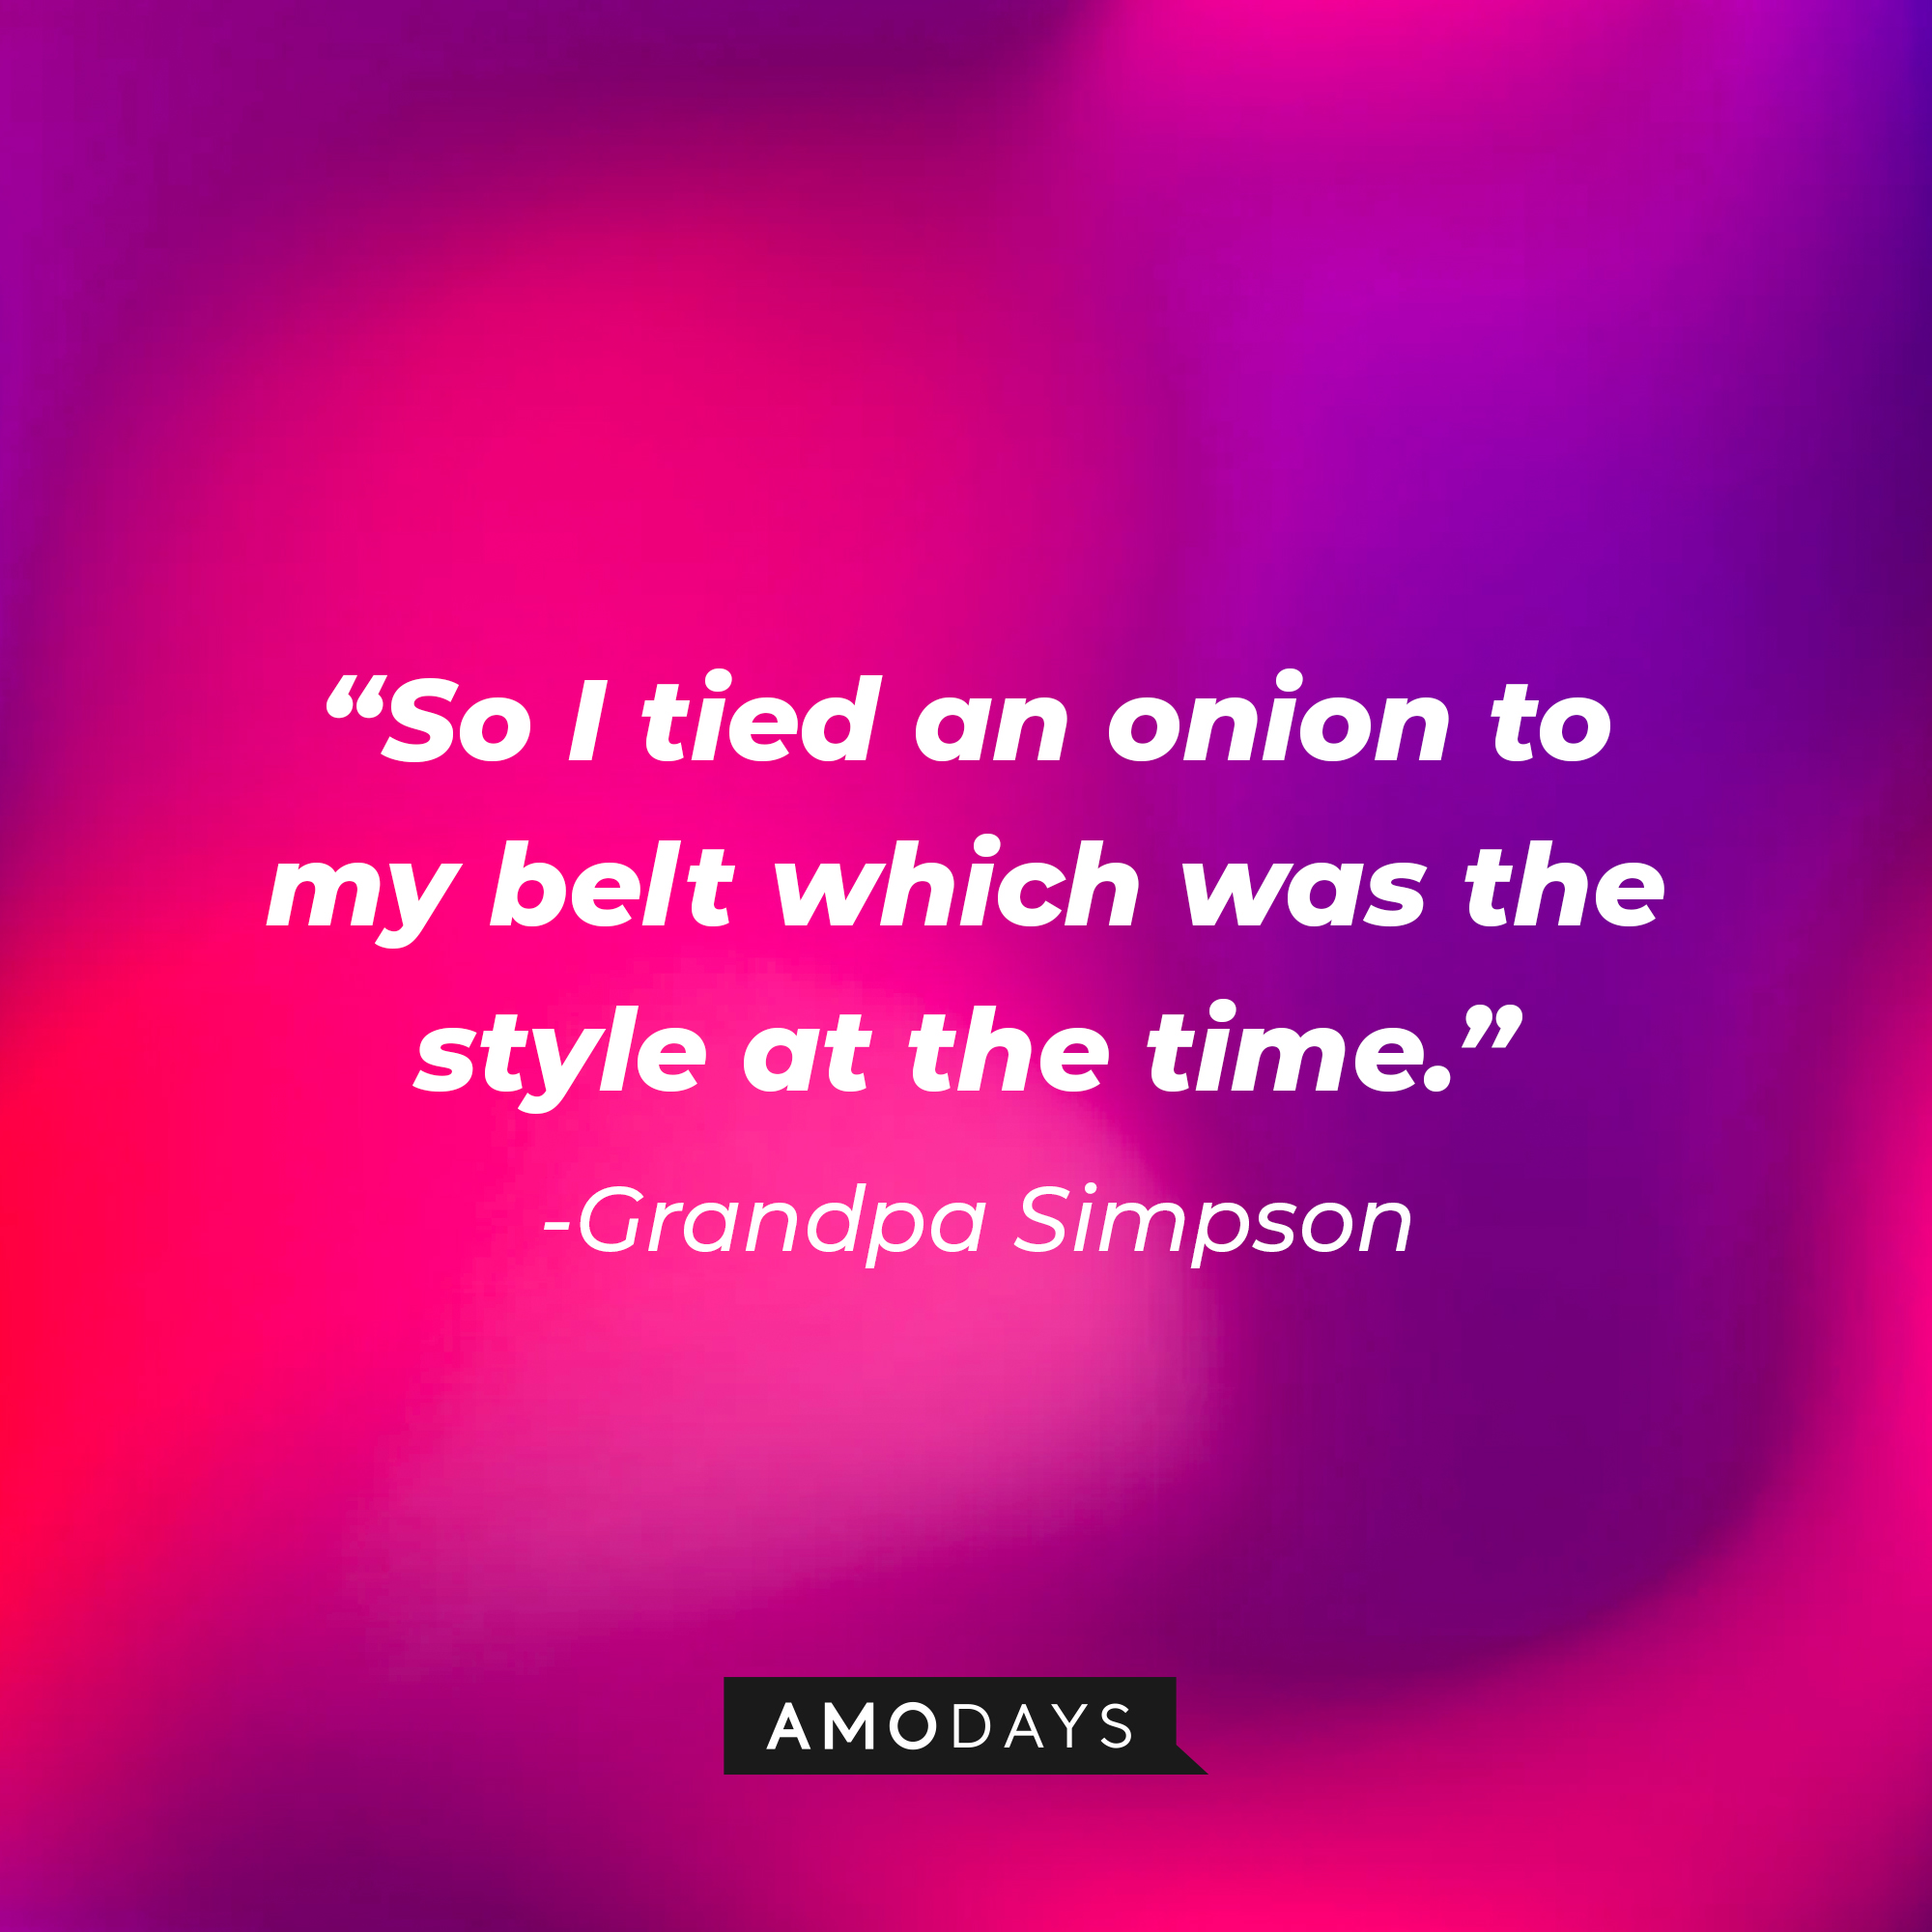 Grandpa Simpson's quote: “So I tied an onion to my belt, which was the style at the time.” | Source: AmoDays